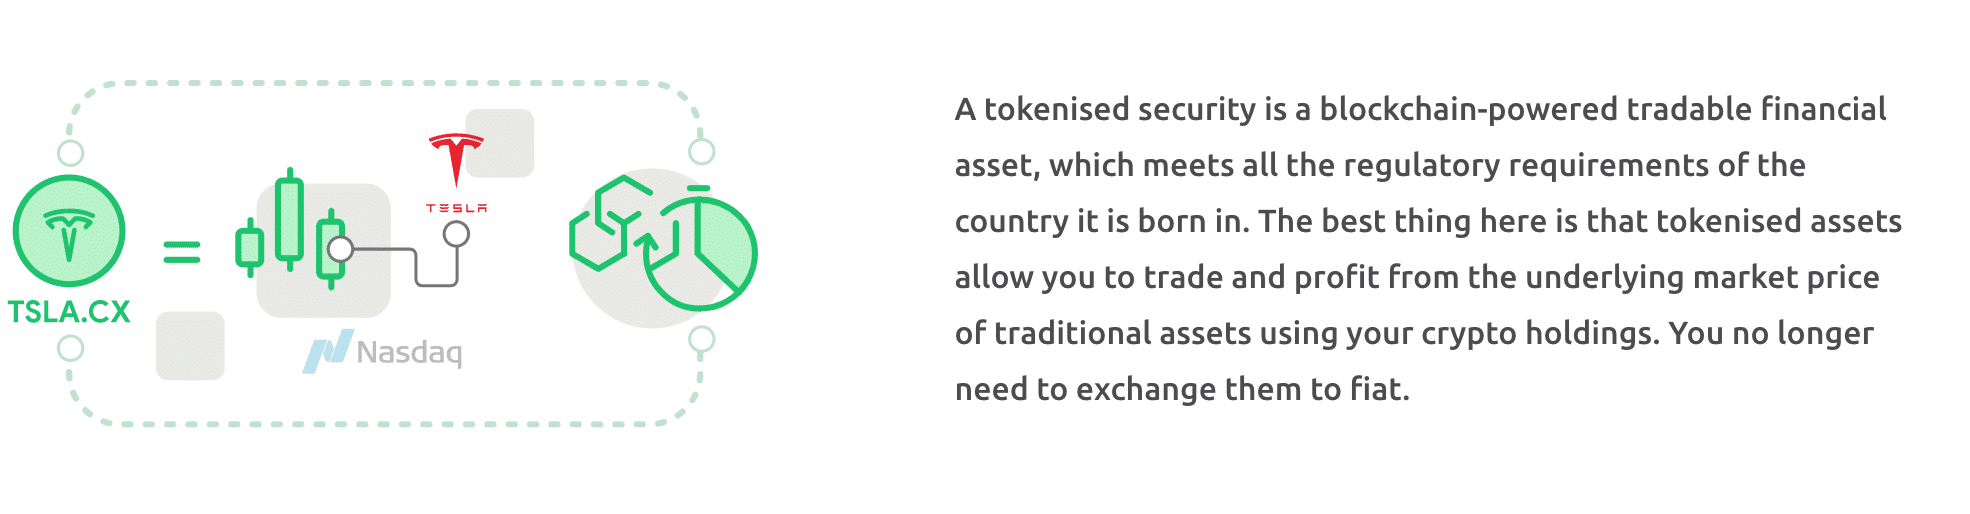 currency.com tokenised assets